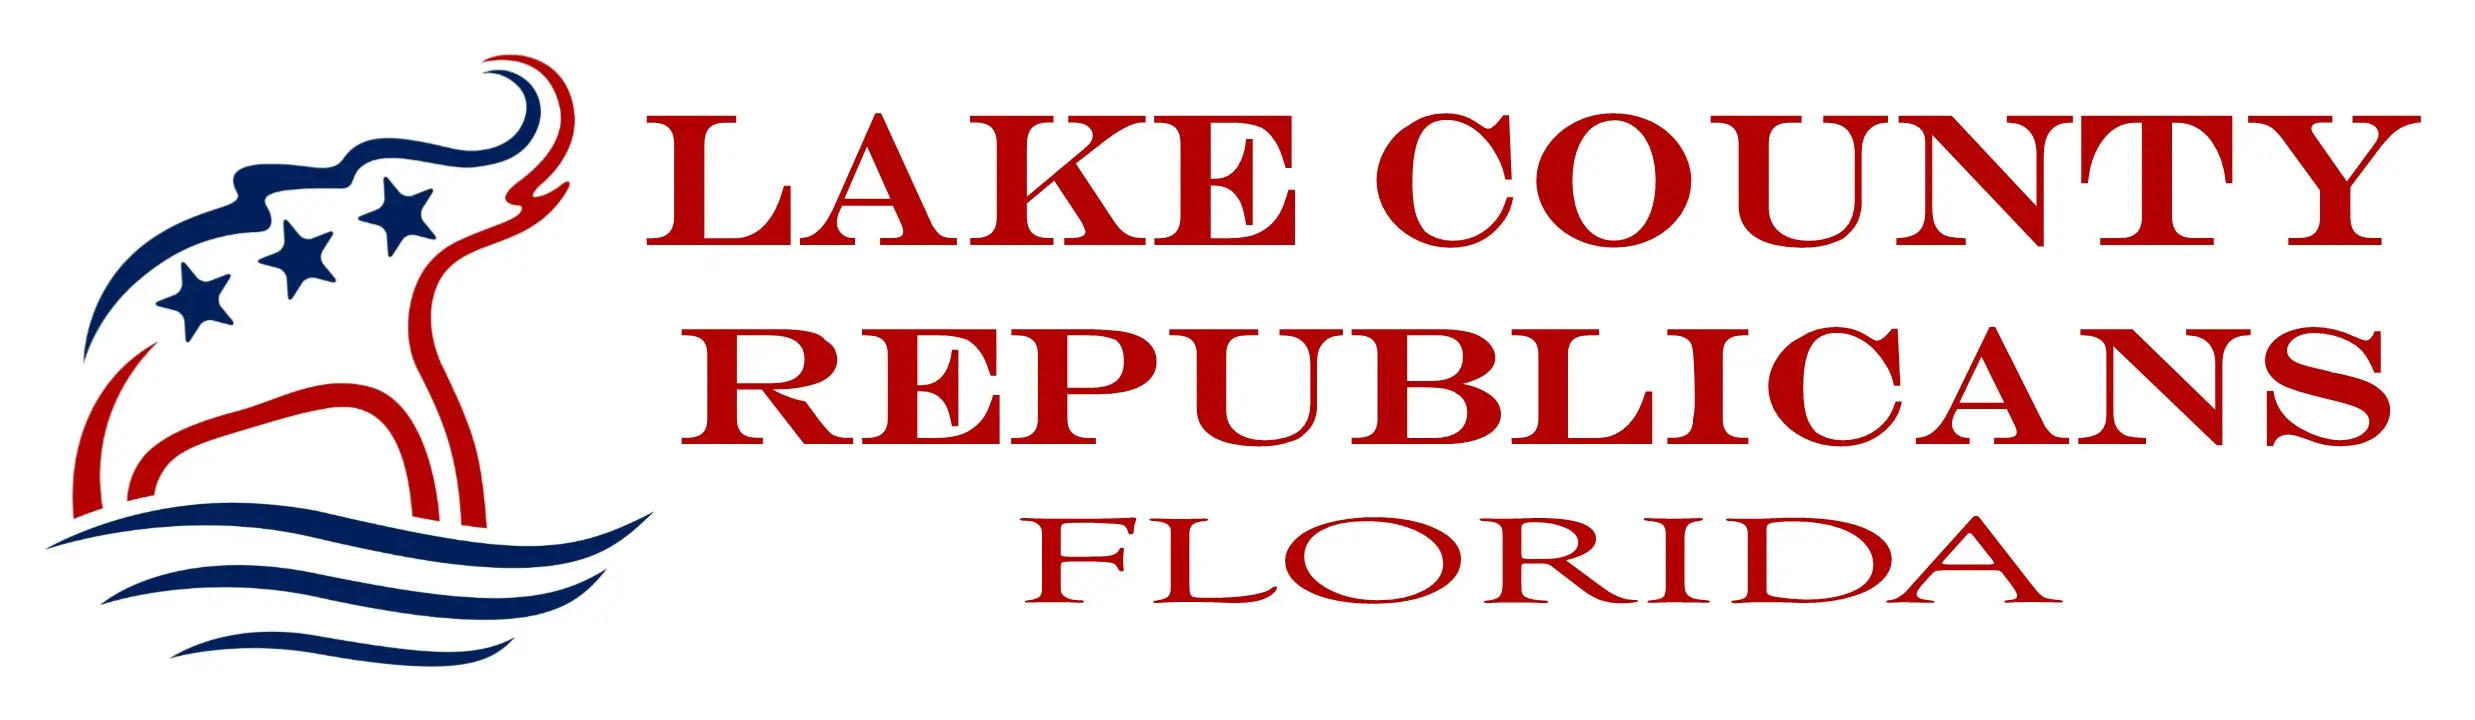 lake county florida auditor - Who is the tax collector in Lake County Florida